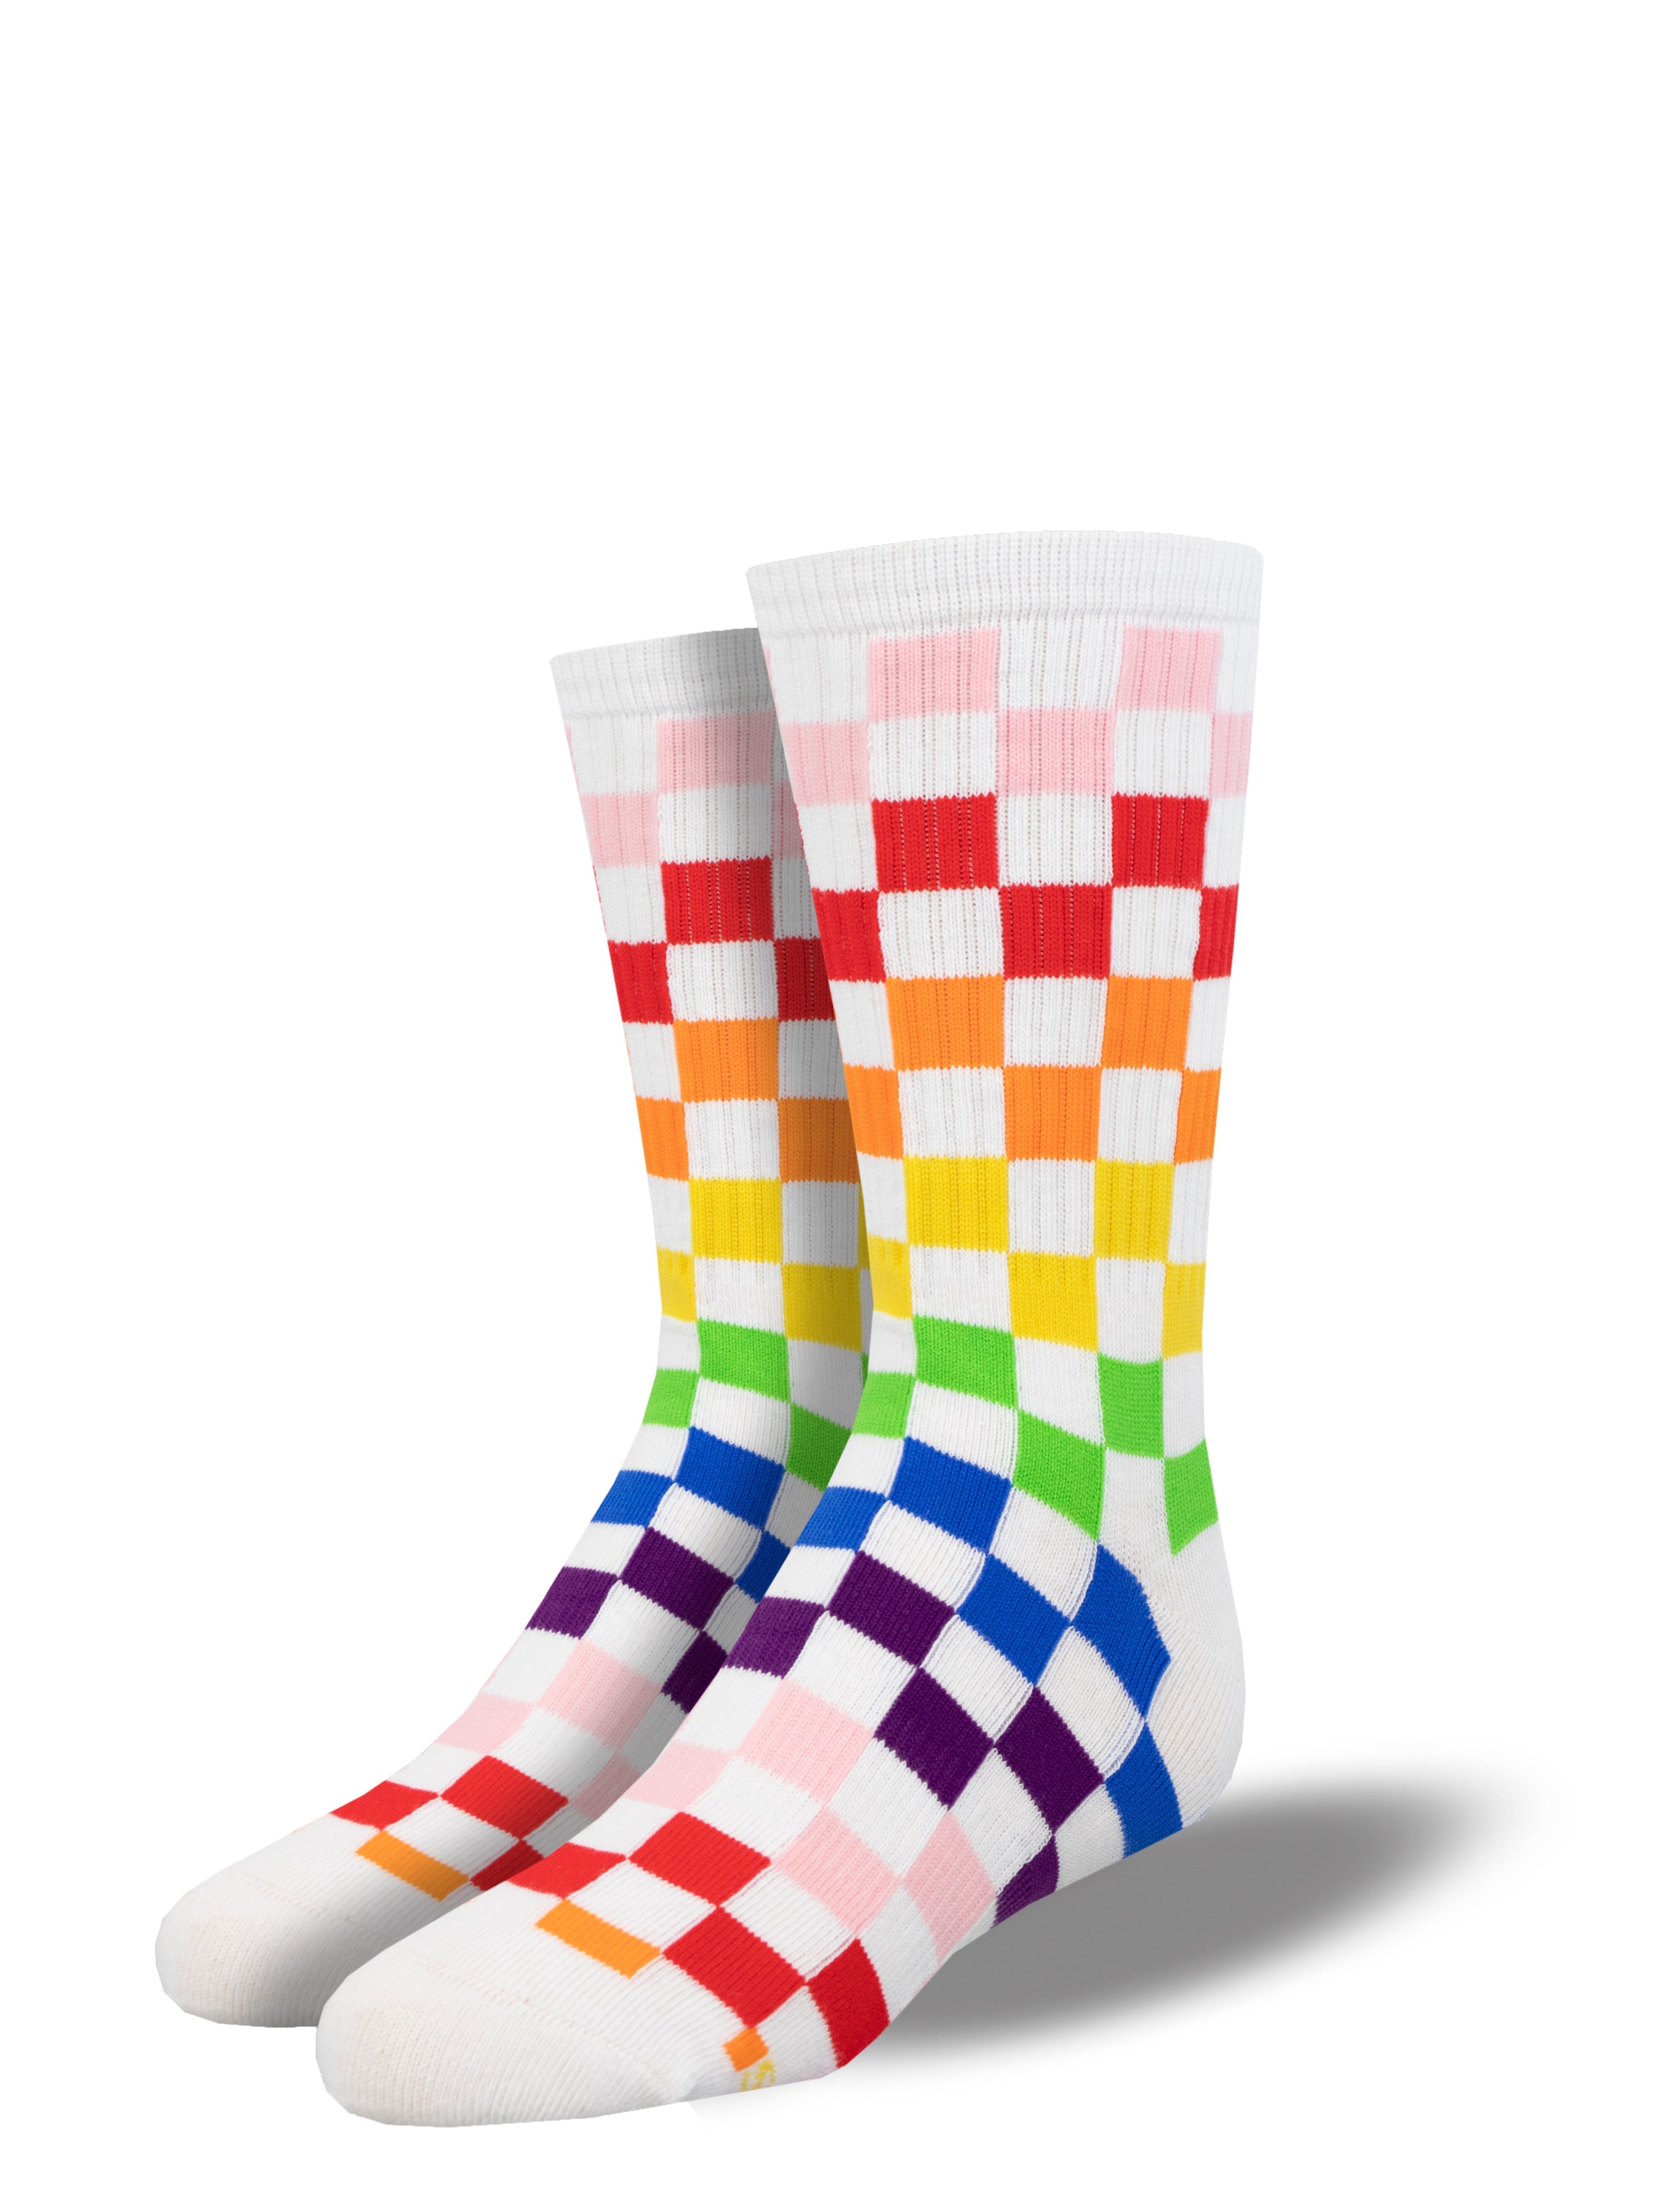 Kids' Athletic "Check Me Out" Socks